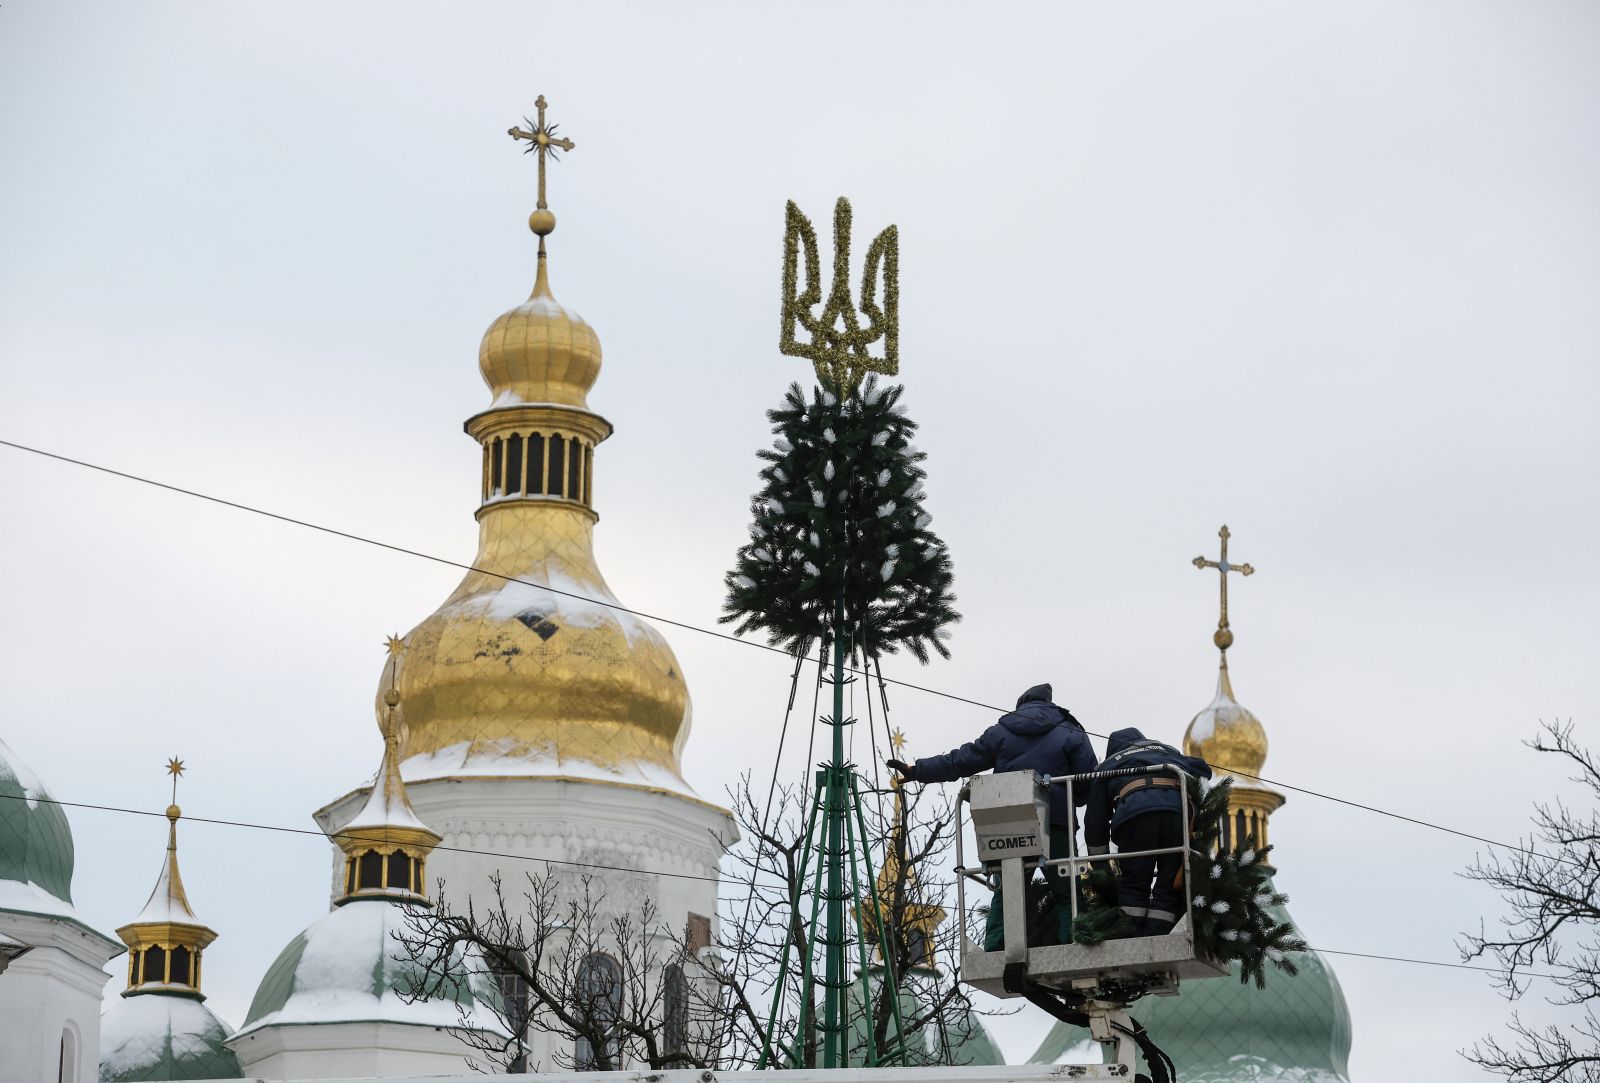 epa11010824 Workers place the State emblem on top of a Christmas tree in front of Saint Sophia's Cathedral in Kyiv, Ukraine, 04 December 2023 This year Ukraine will mark Christmas on the 25 December together with Europe, unlike in previous years when Ukraine marked Christmas on 07 January with other post-Soviet countries. Russian troops entered Ukraine on 24 February 2022 starting a conflict that has provoked destruction and a humanitarian crisis.  EPA/SERGEY DOLZHENKO